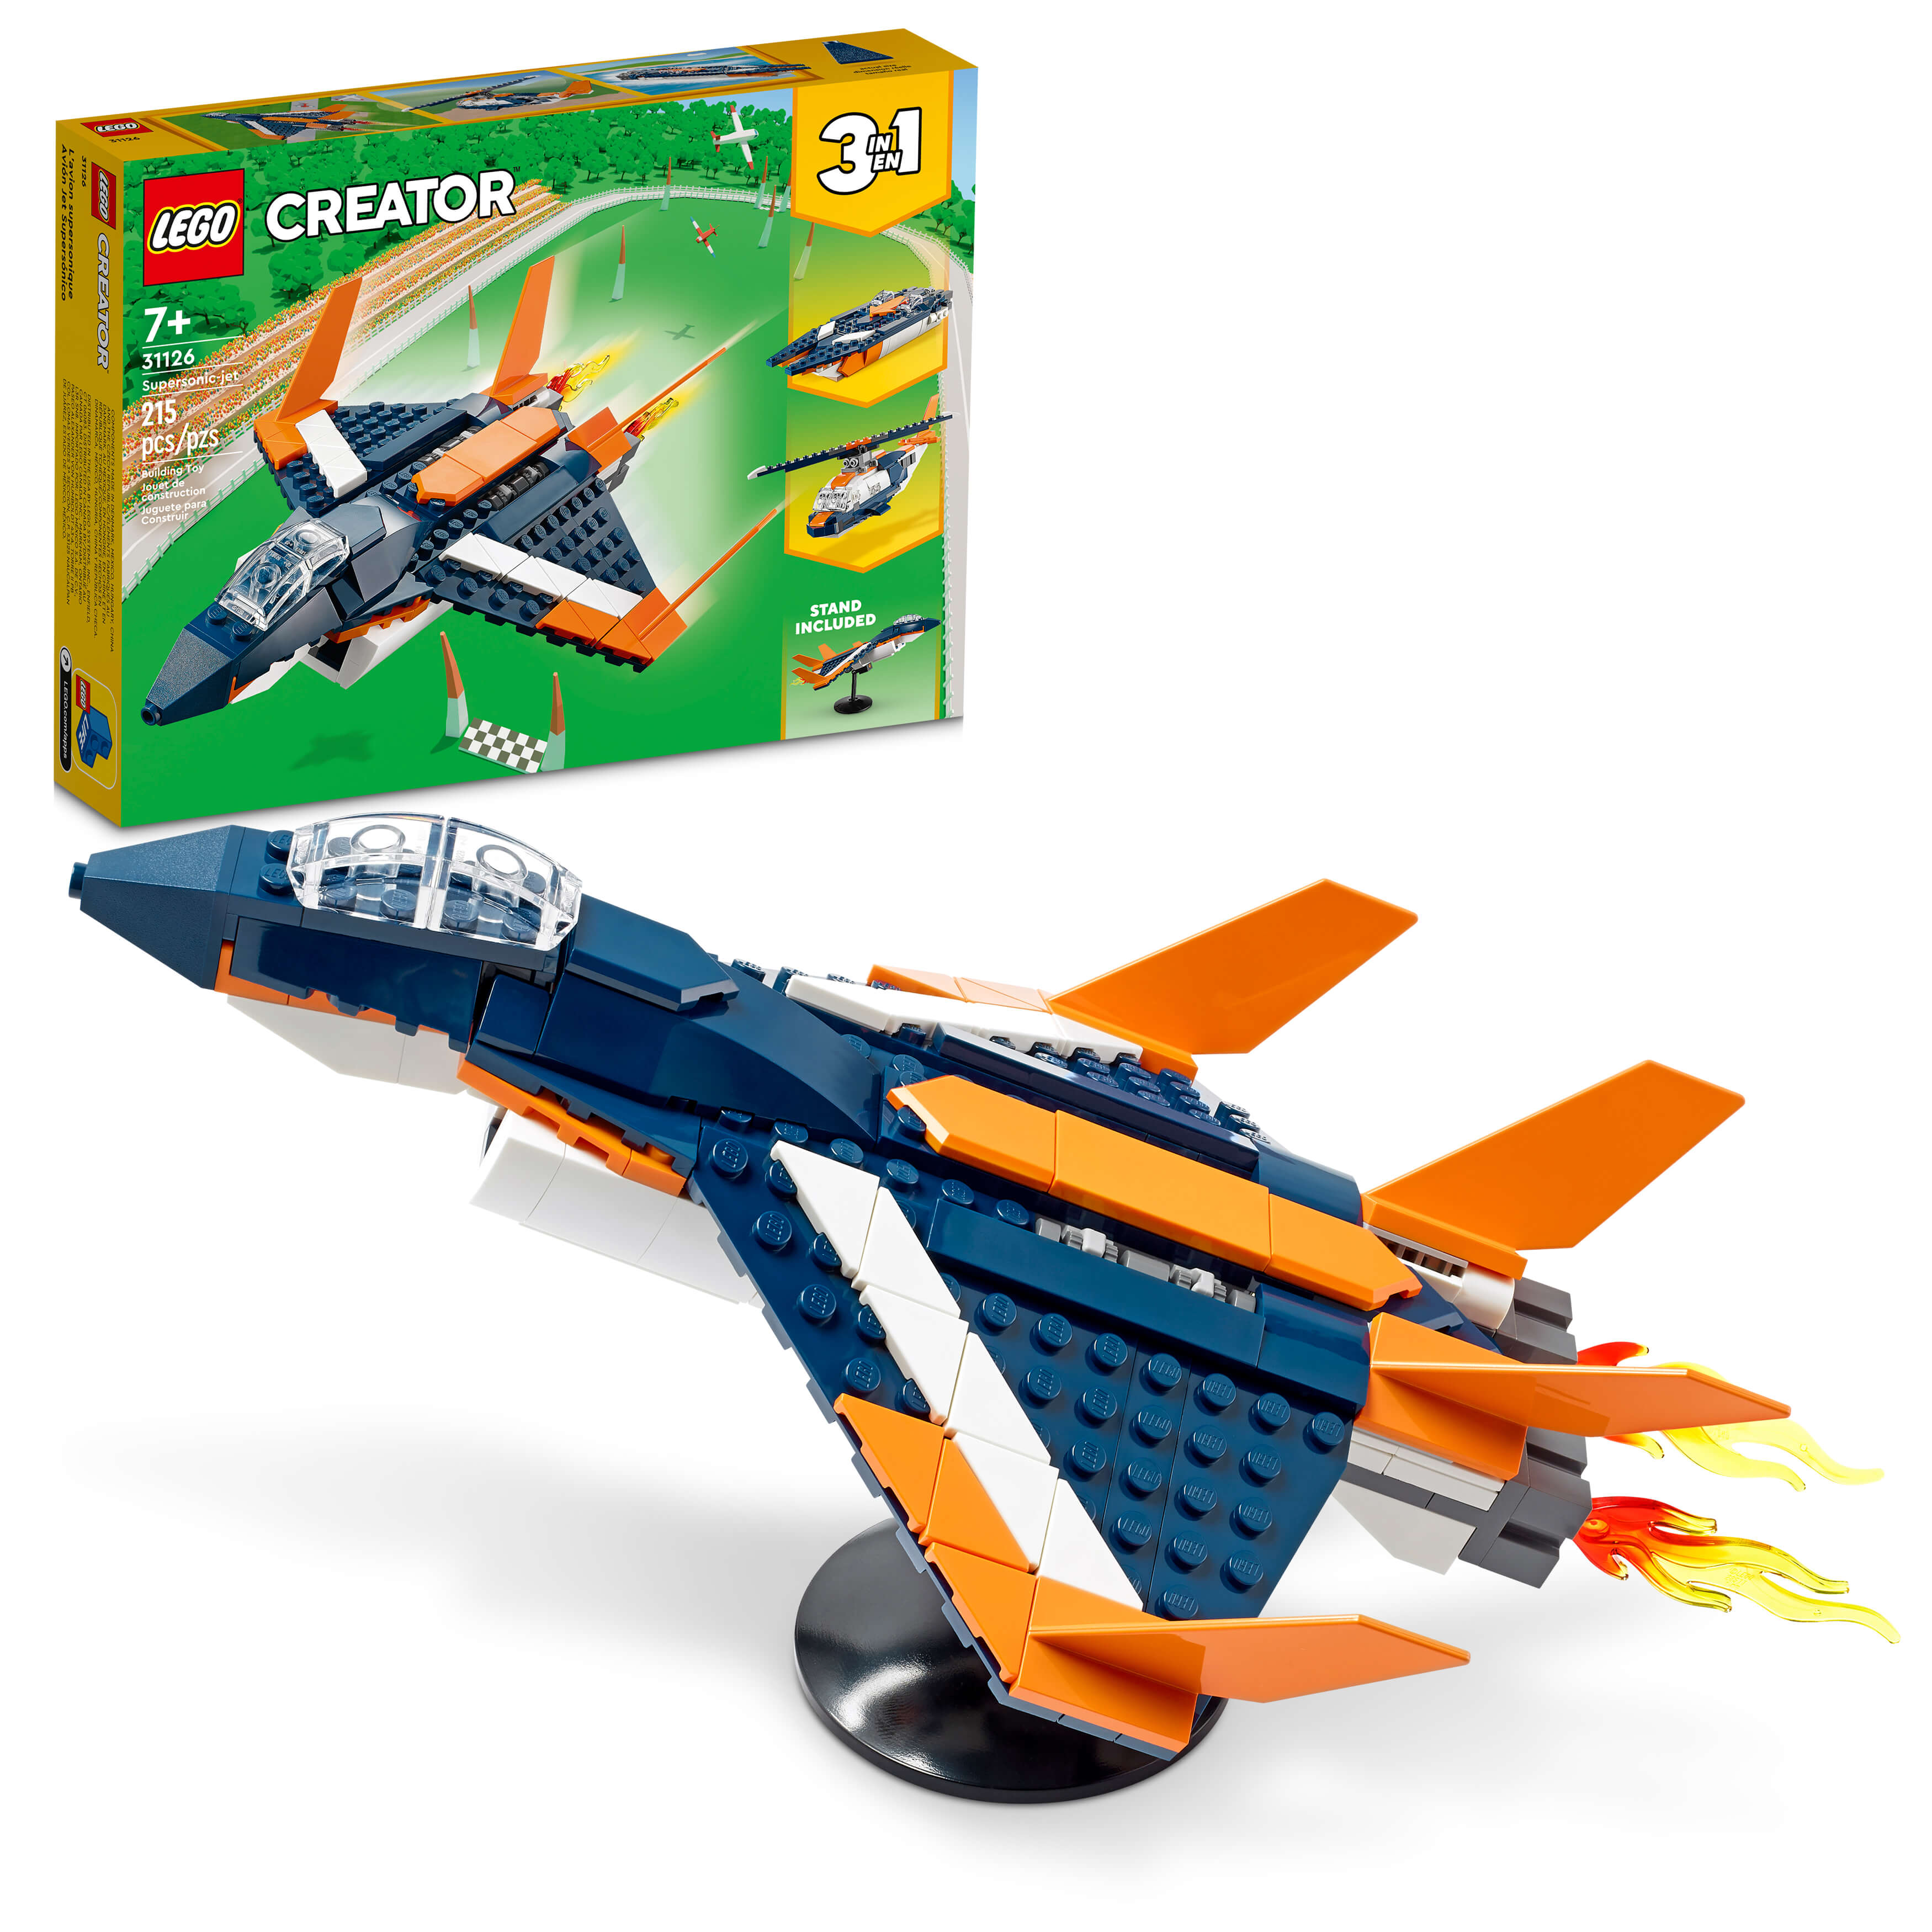 LEGO® Creator 3in1 Supersonic-jet 31126 Building Kit (215 Pieces)